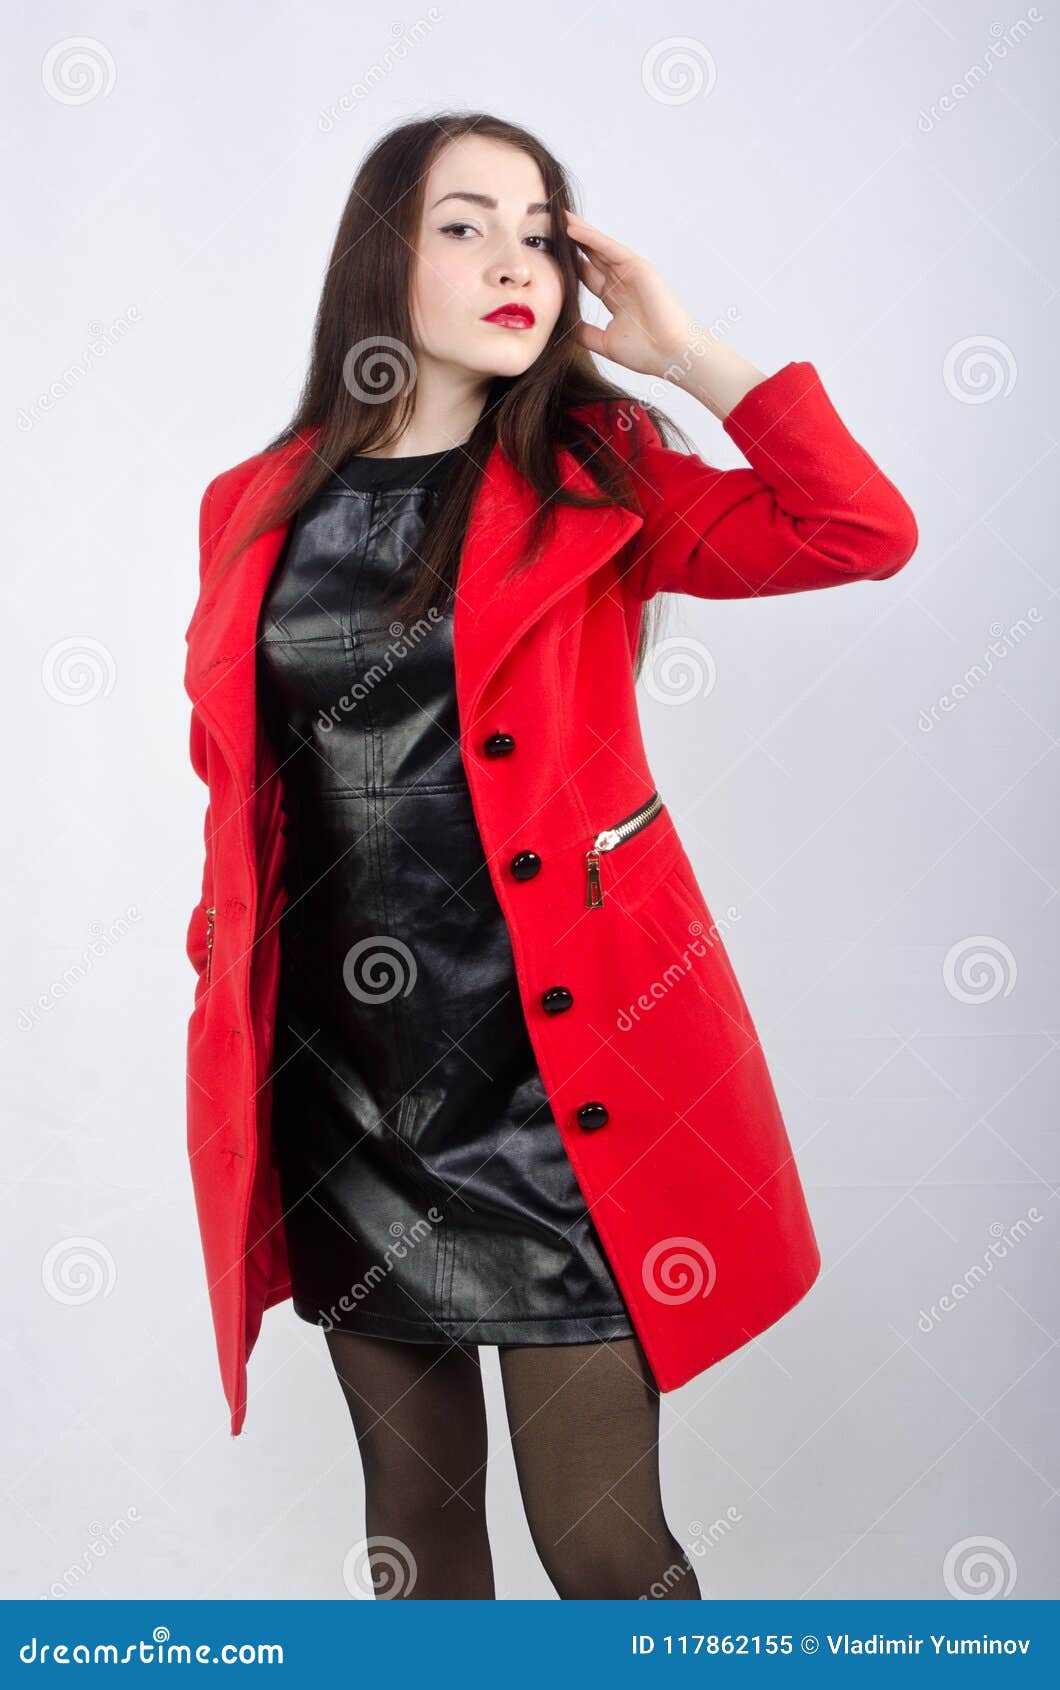 Young Beautiful Girl in Coat Stock Image - Image of clothes, loader ...